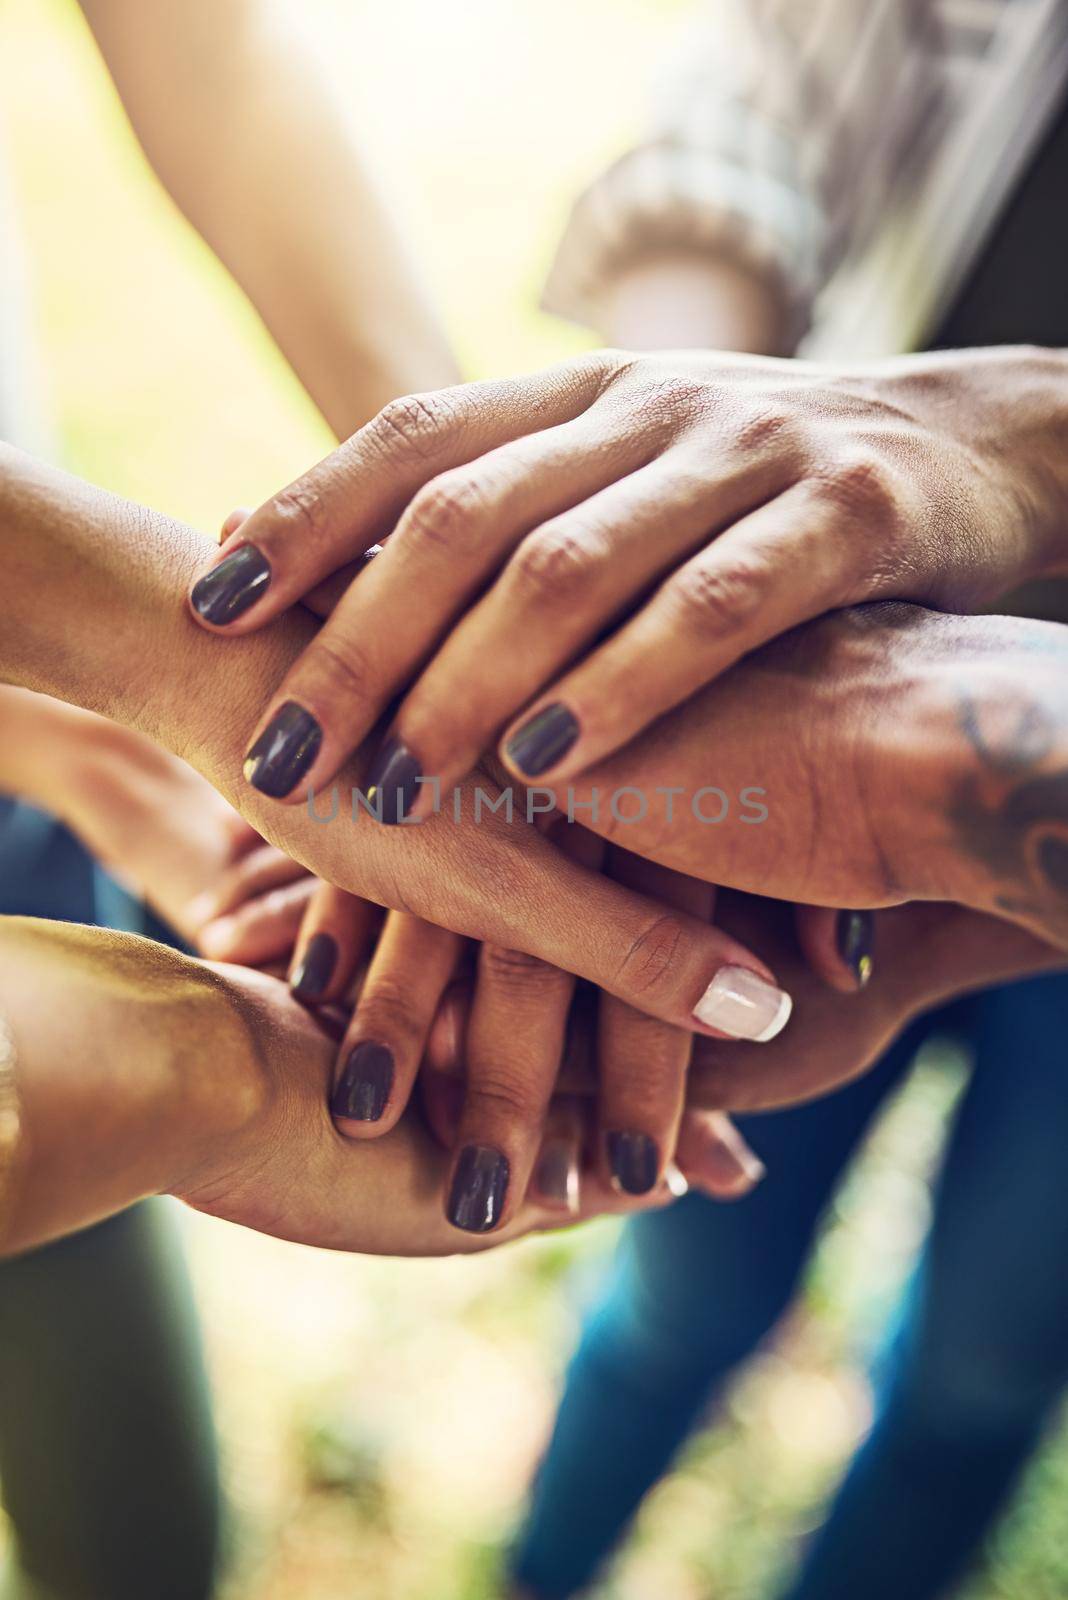 Together is better. Closeup shot of an unrecognizable group of people joining their hands in a huddle outdoors